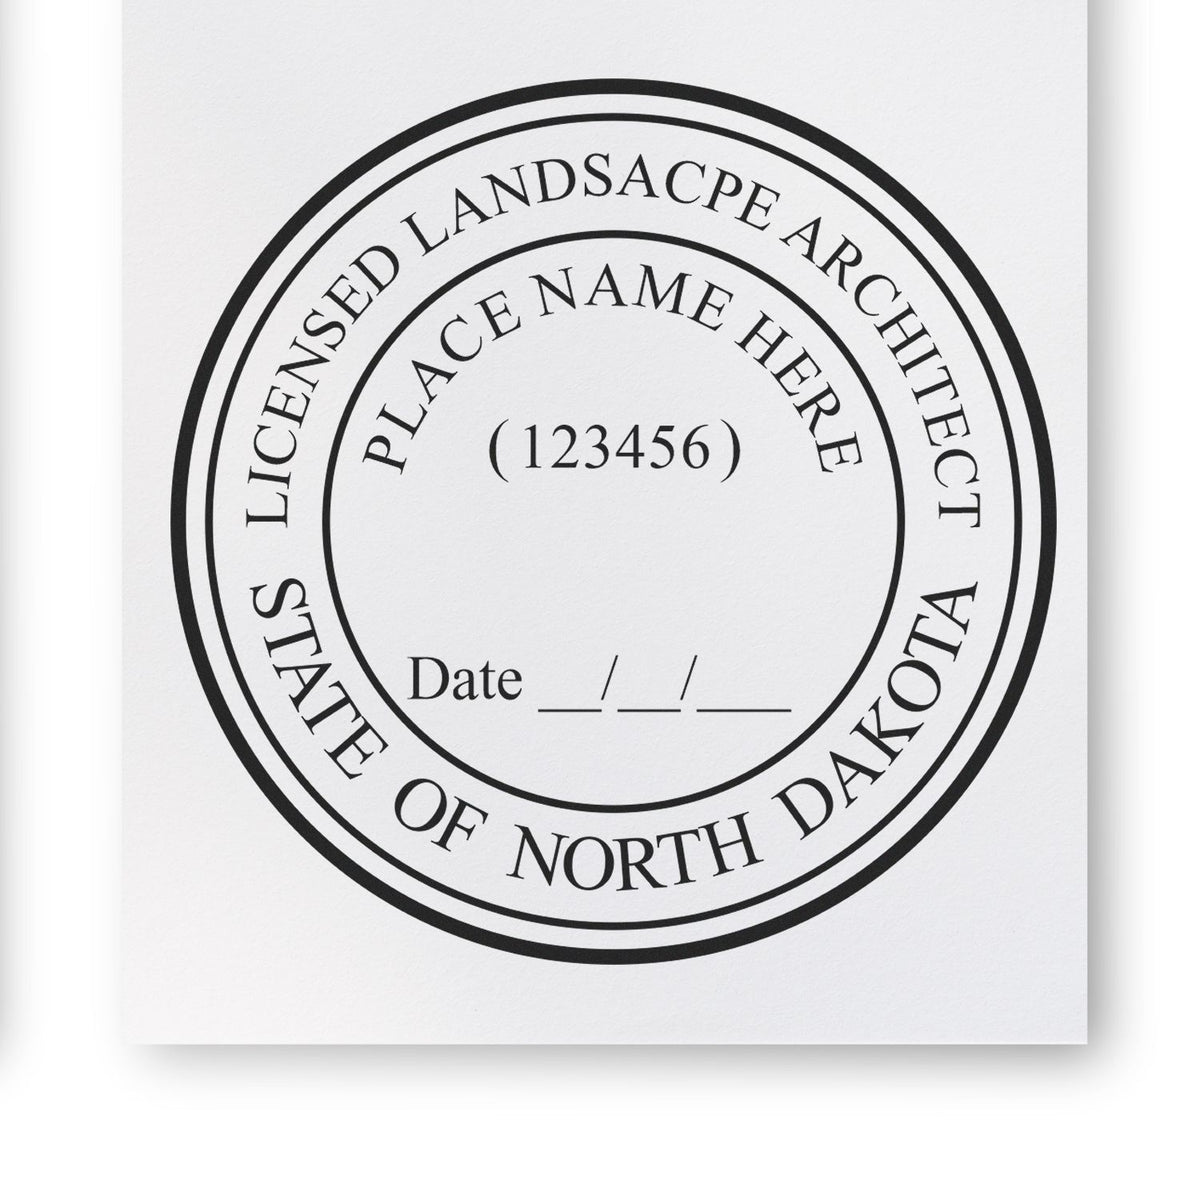 This paper is stamped with a sample imprint of the Premium MaxLight Pre-Inked North Dakota Landscape Architectural Stamp, signifying its quality and reliability.